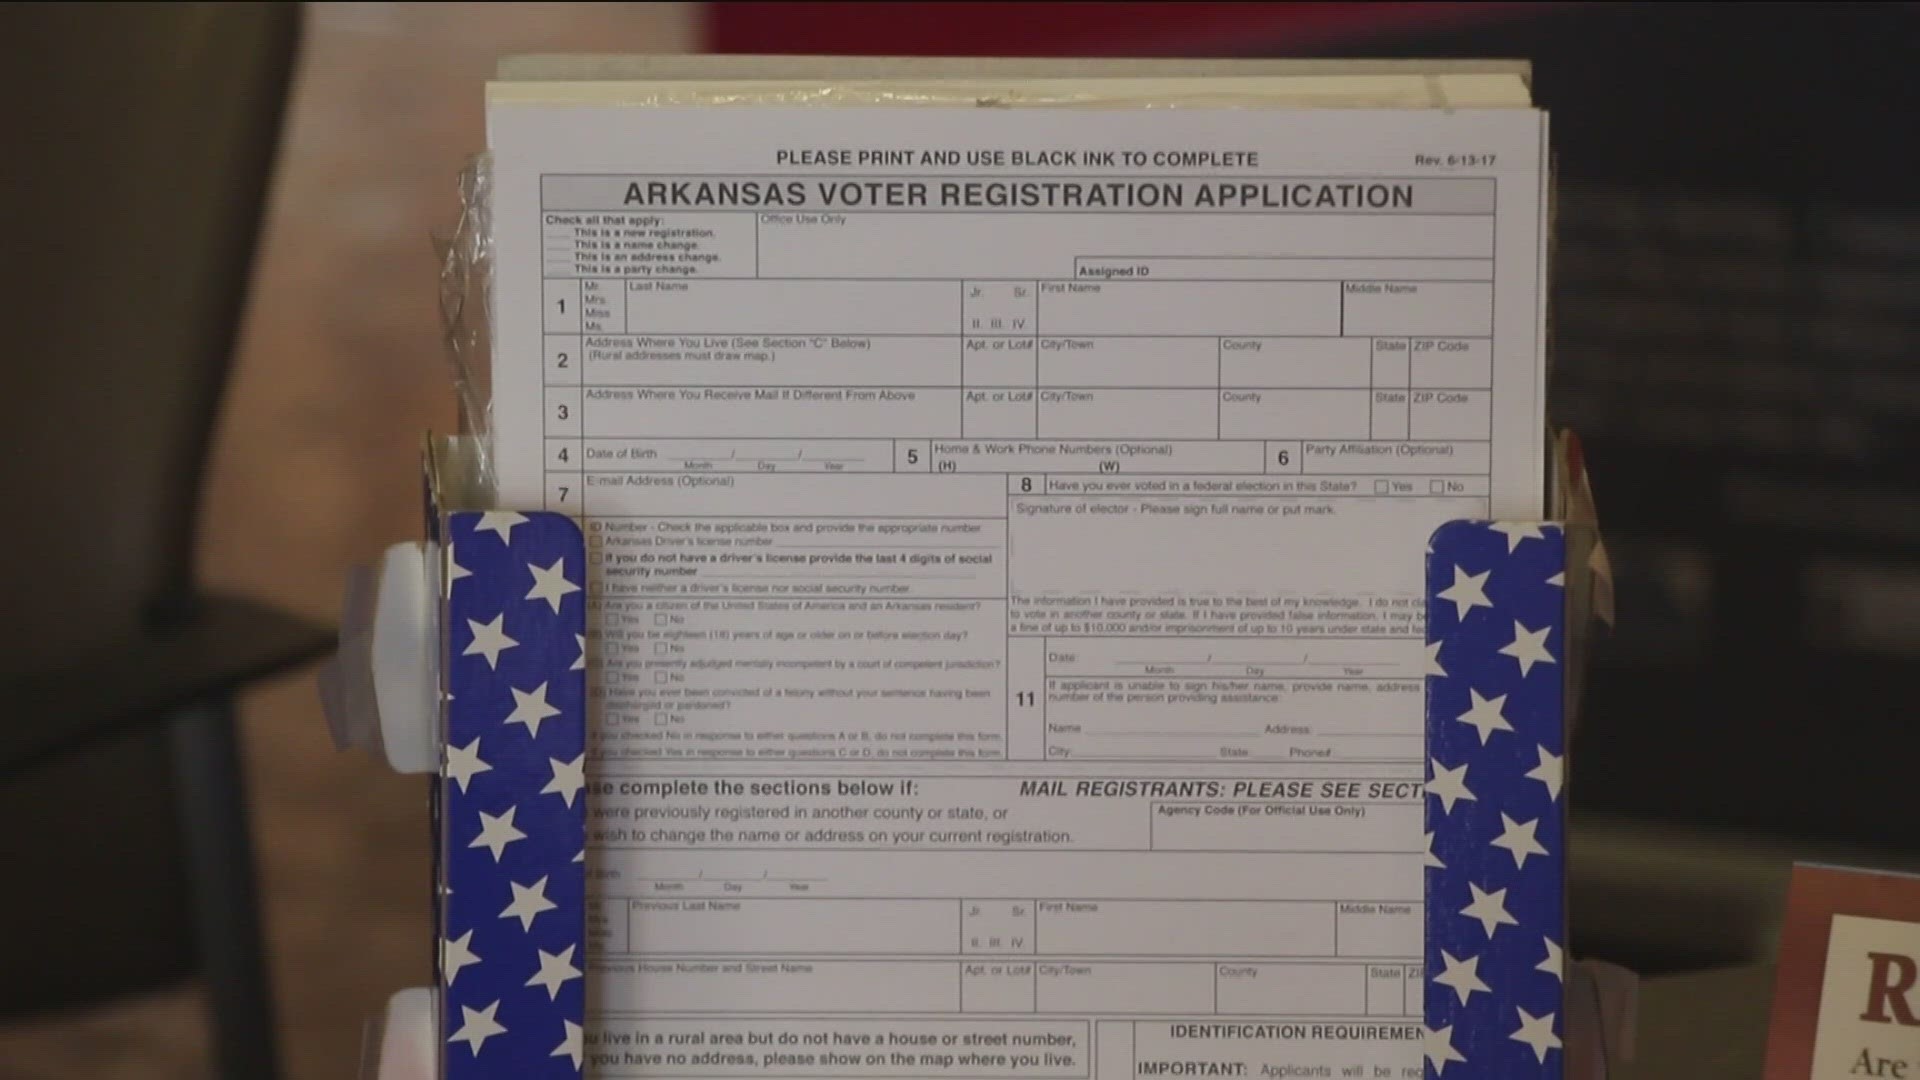 Due to security measures, the voter registration signatures rules are up for debate in Arkansas.